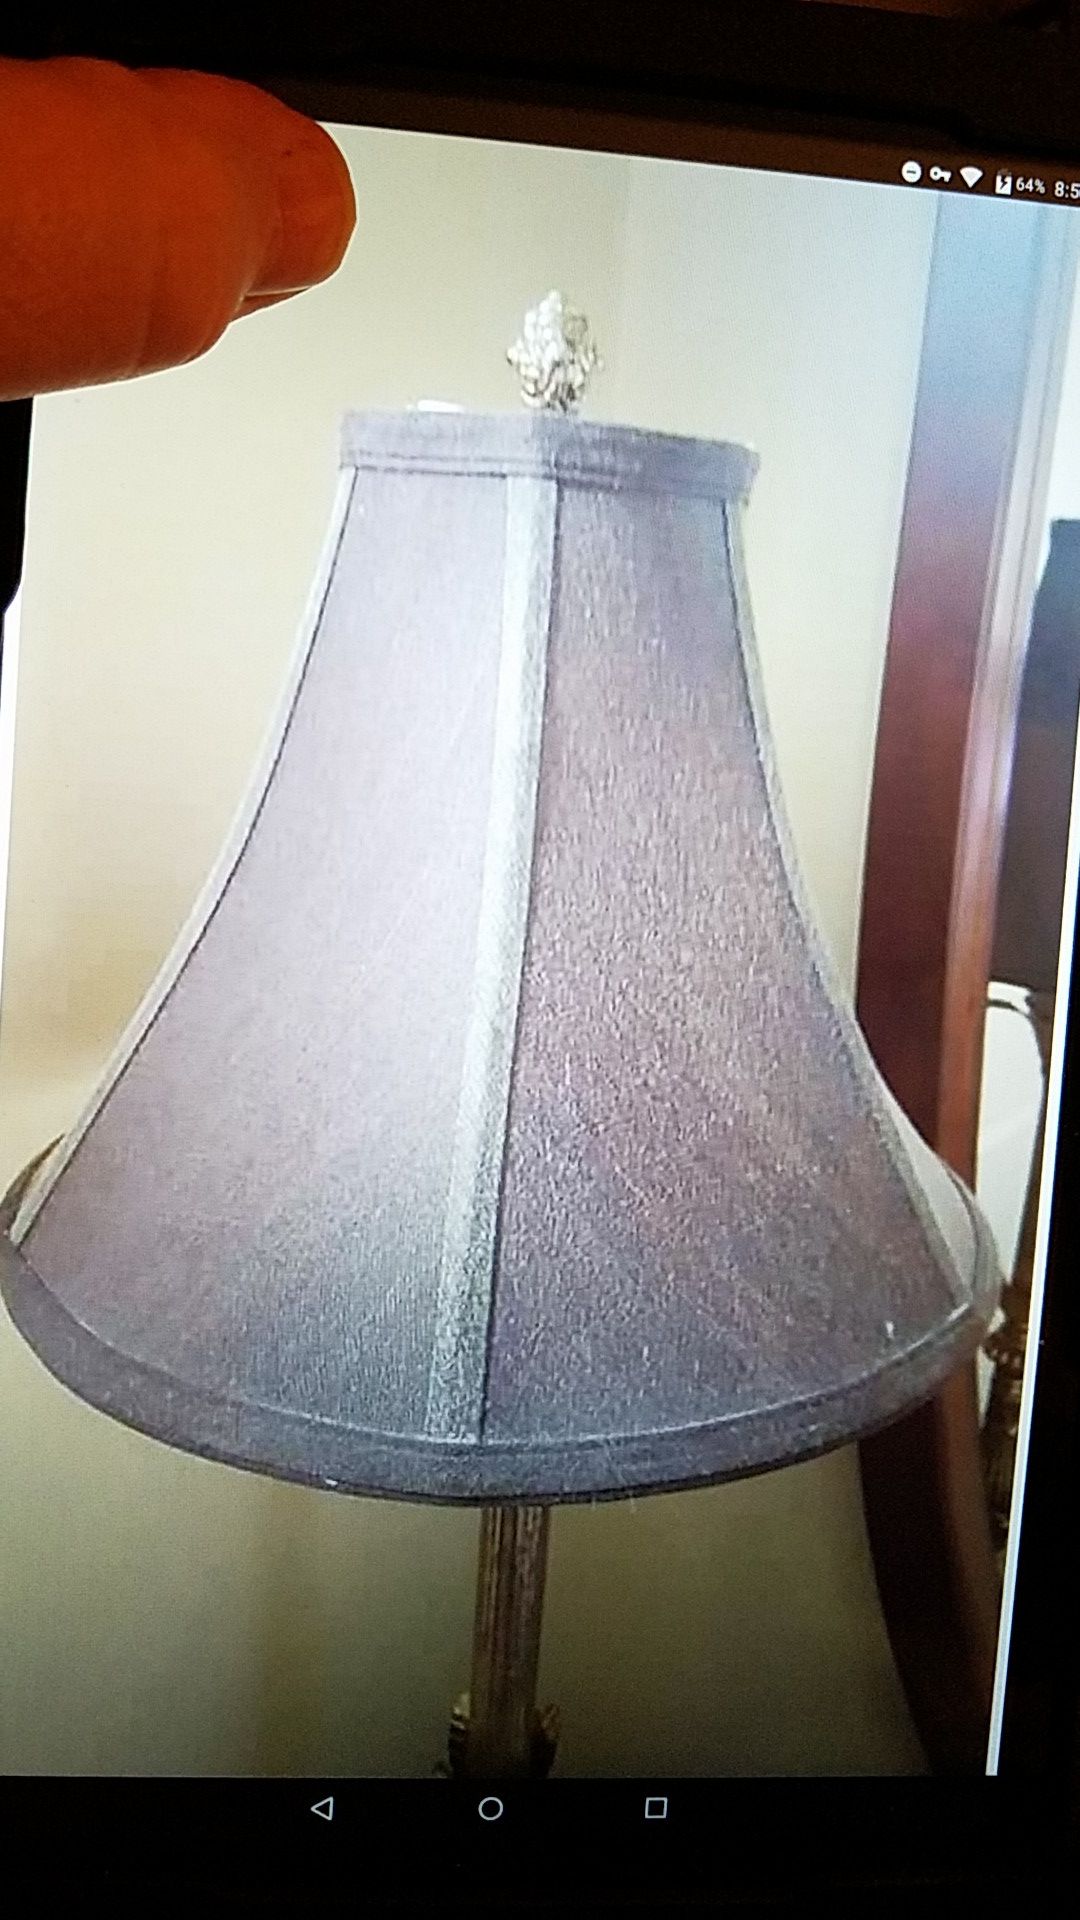 Lamp shade, Charcoal color